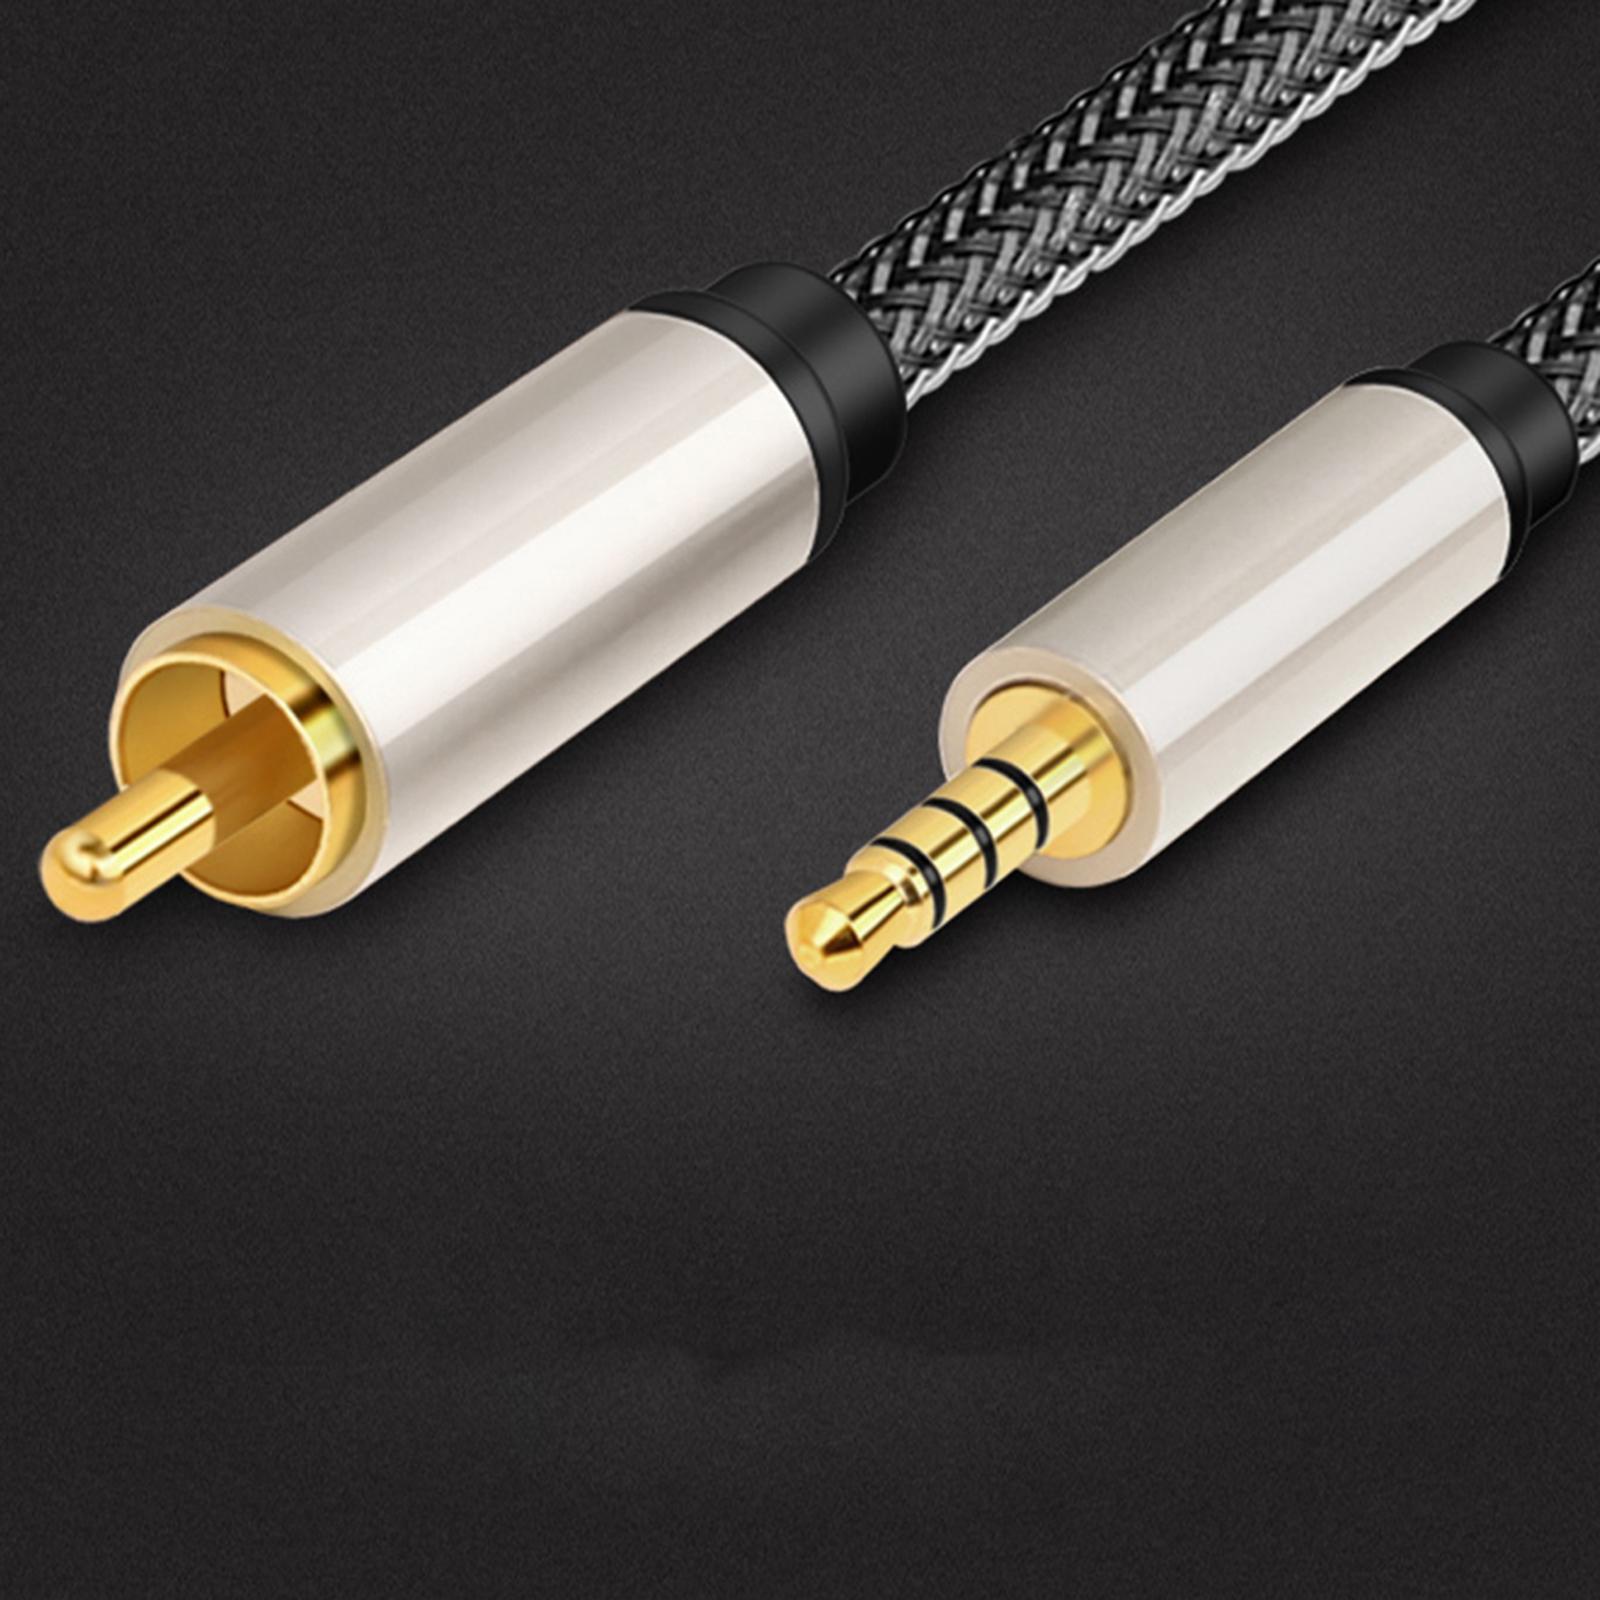 Digital Coaxial Audio Video Cable RCA to 3.5mm Lossless Jack Male Auxiliary Input Adapter Extension Coaxial Cable for Home Stereos, HDTV